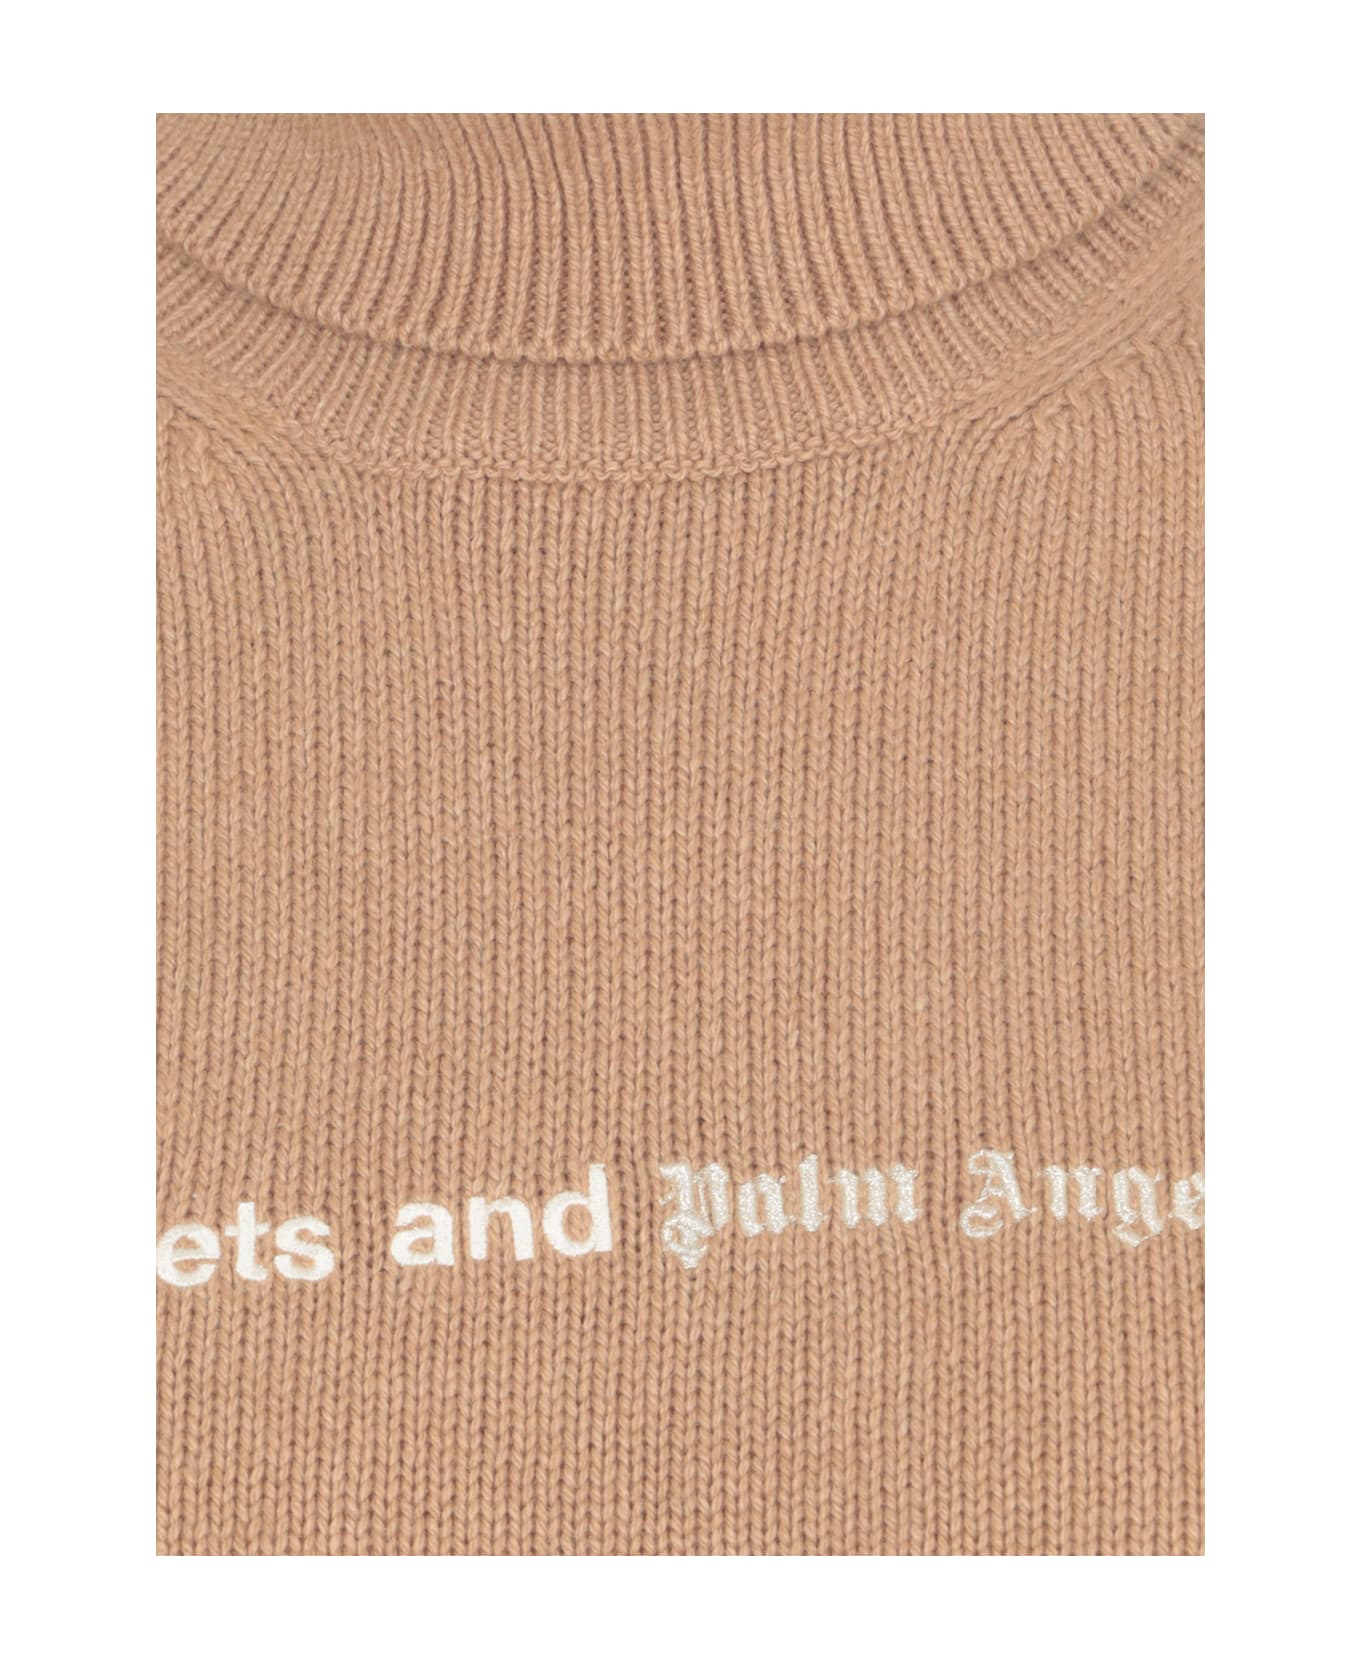 Palm Angels Sunset Cropped Sweater - Brown